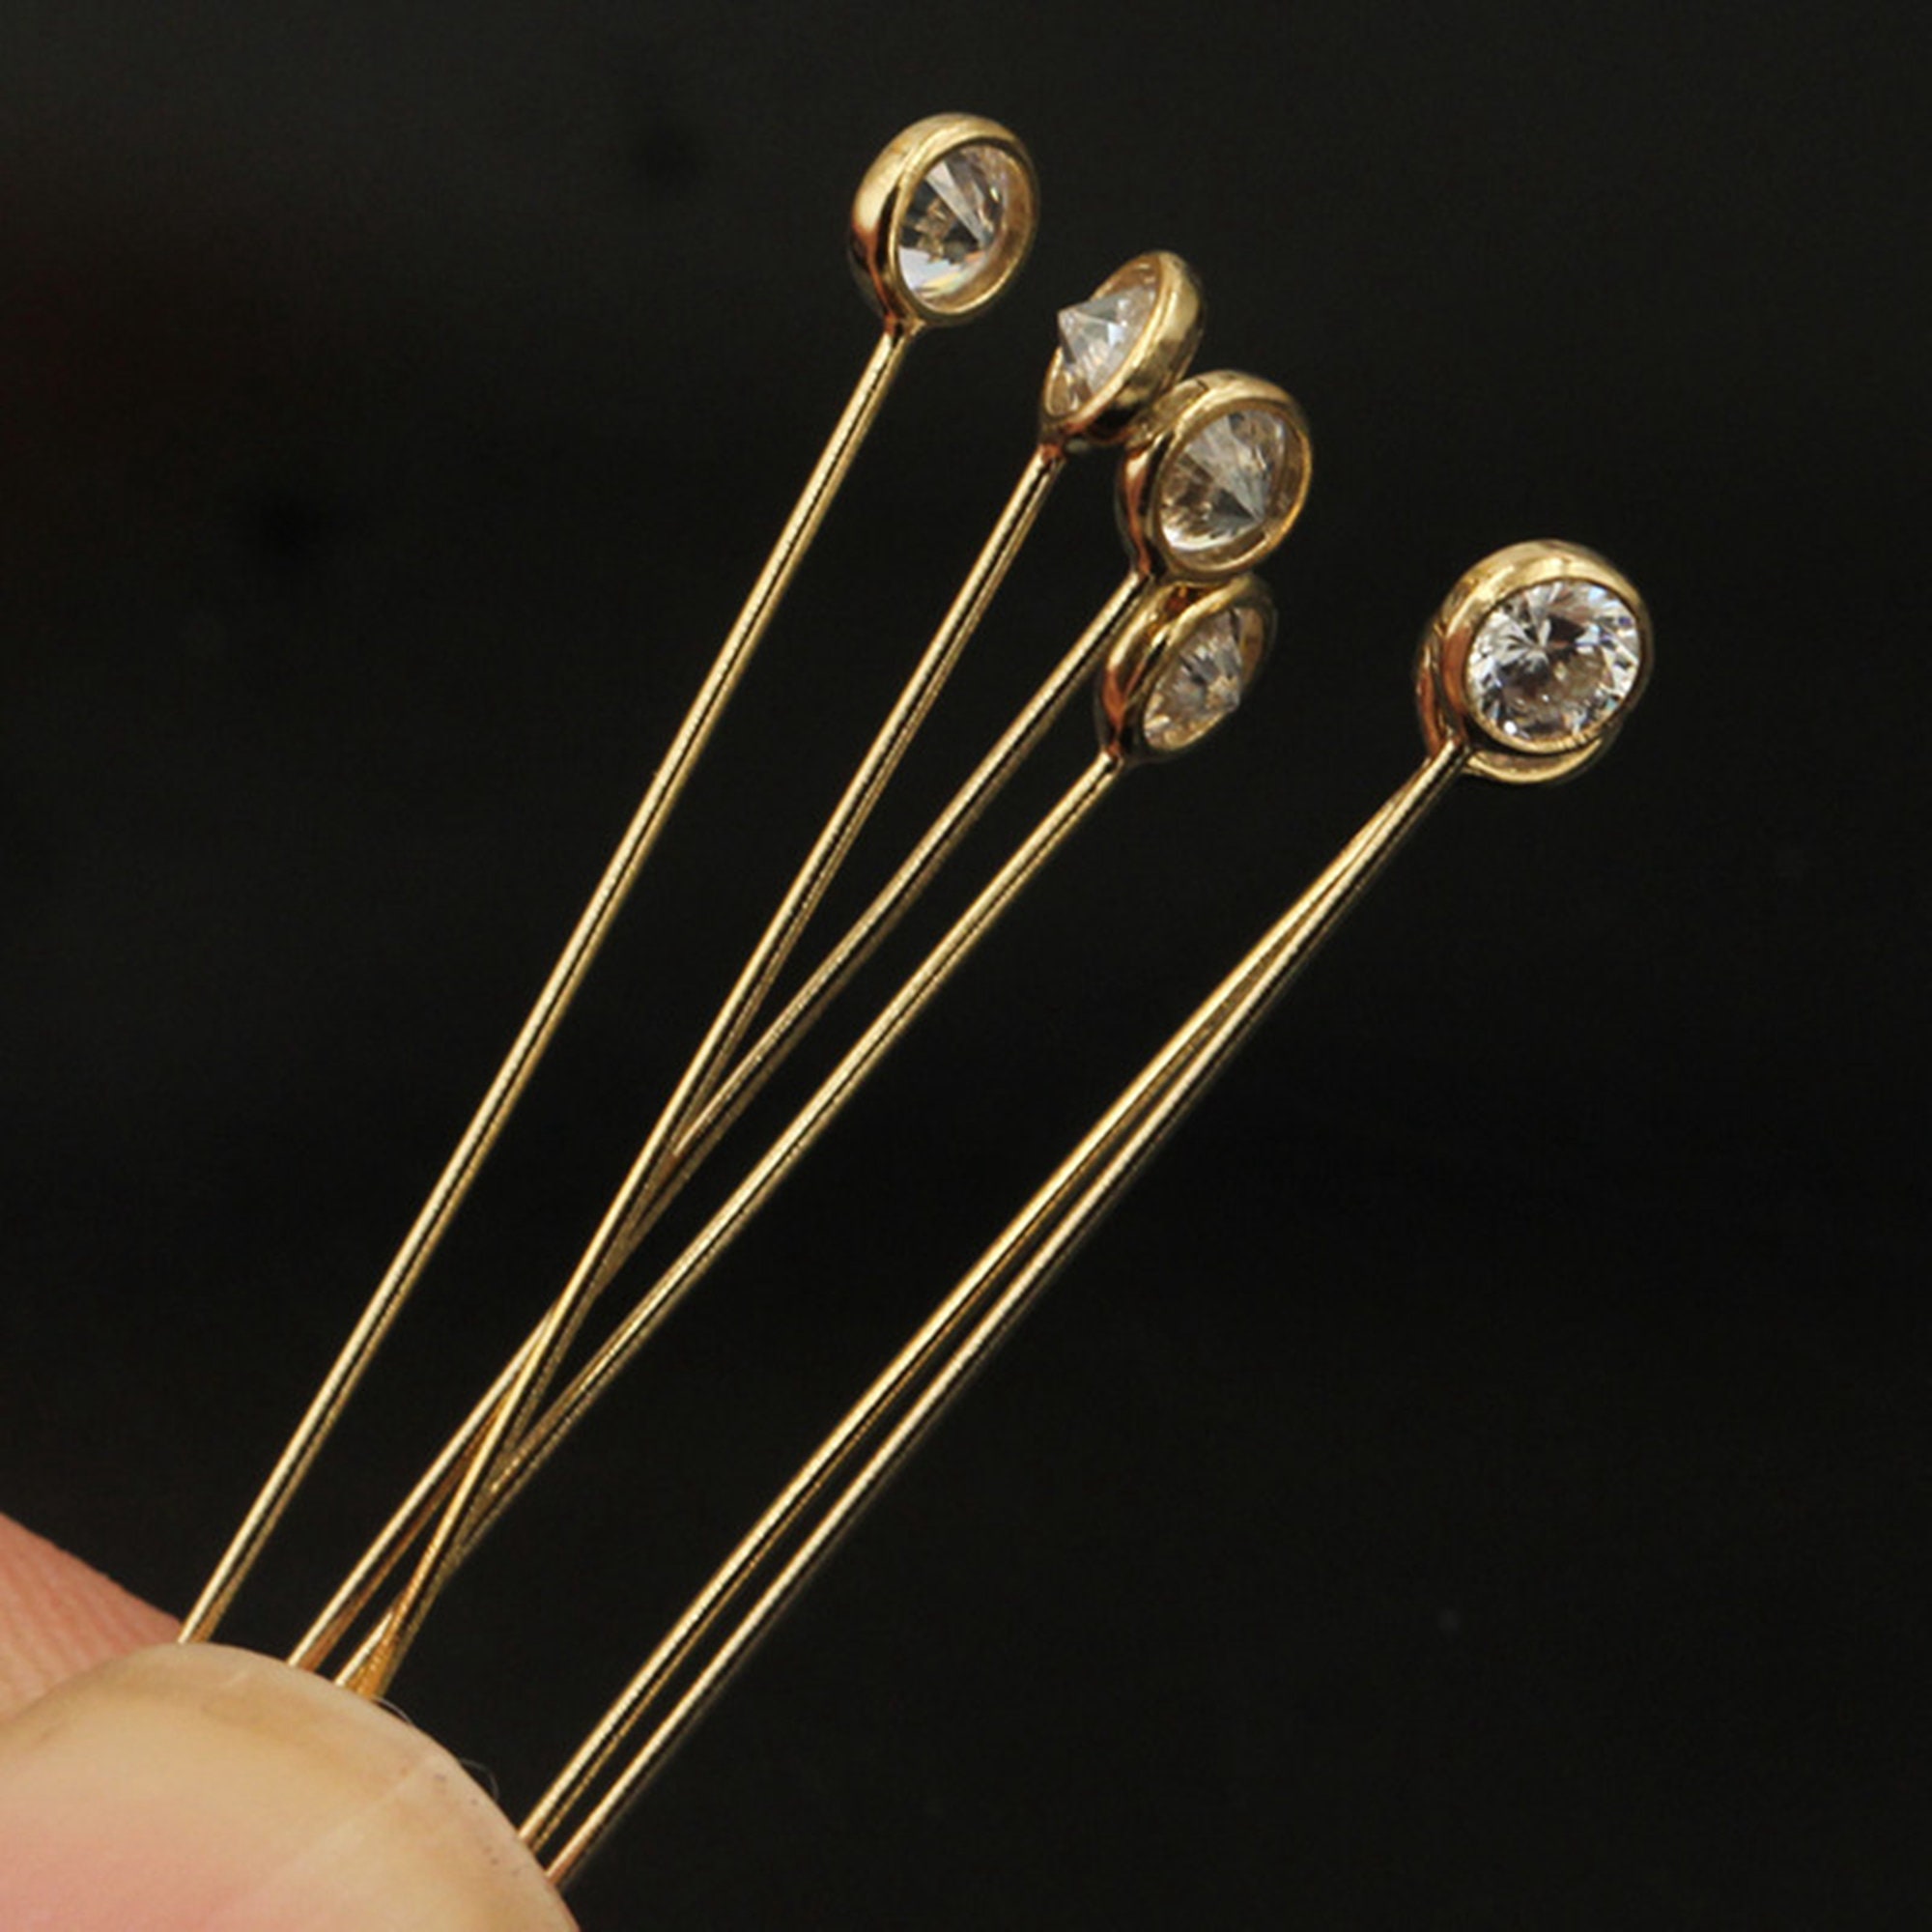 100pcs Stainless Steel 9 Eye Pin Gold Silver Tone 0.6mm Thick Loop Eyepin  Findings for